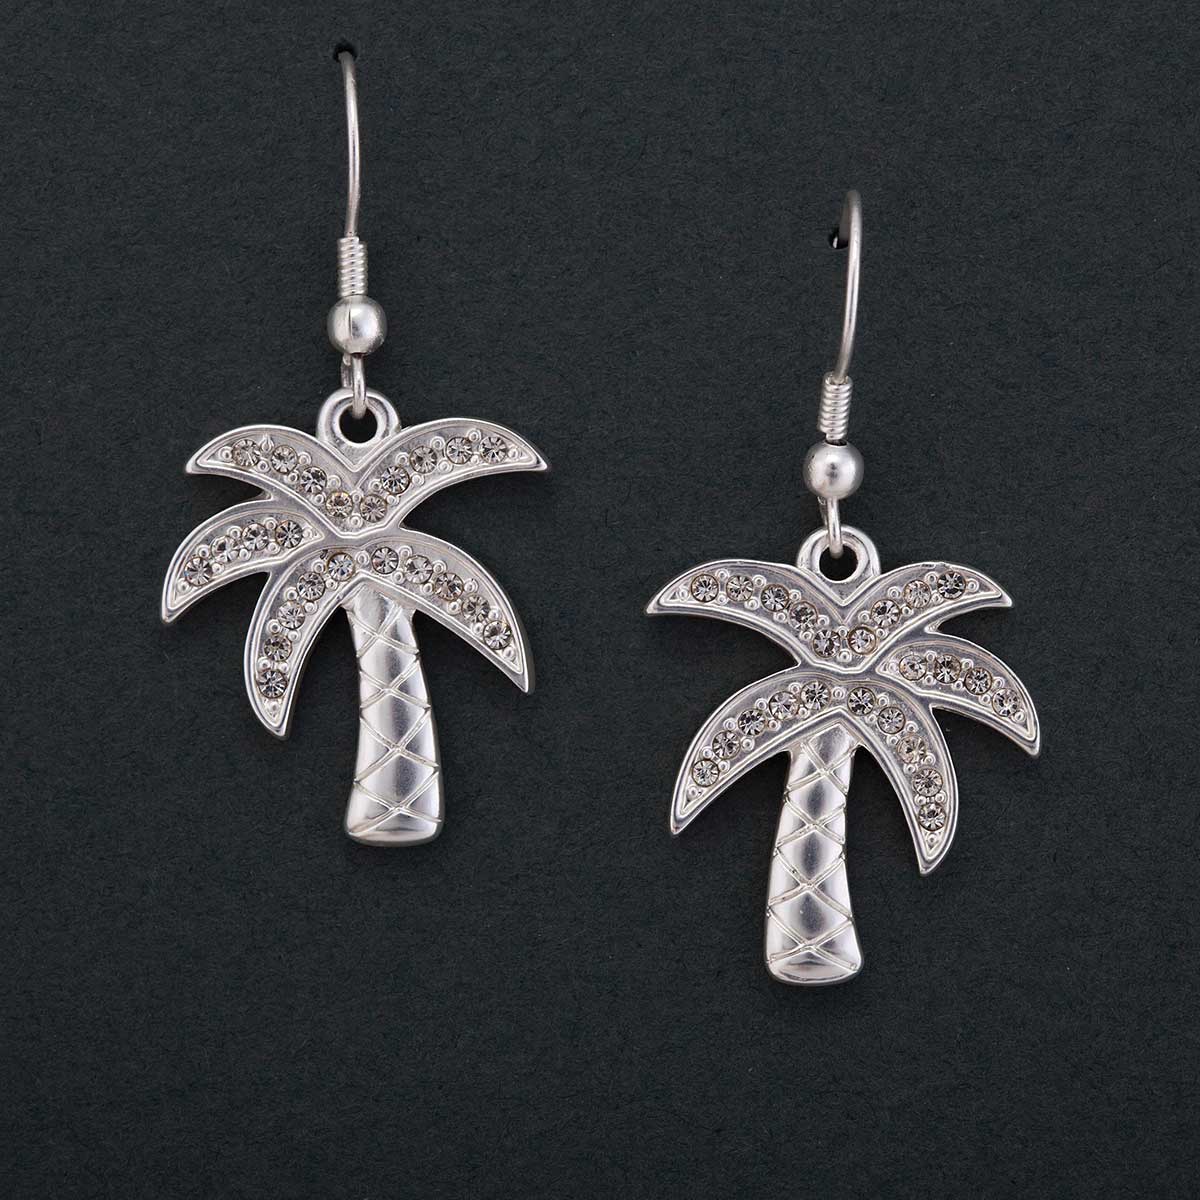 Satin Silver 1"x1" Palm Tree with Crystals French Wire Earrings